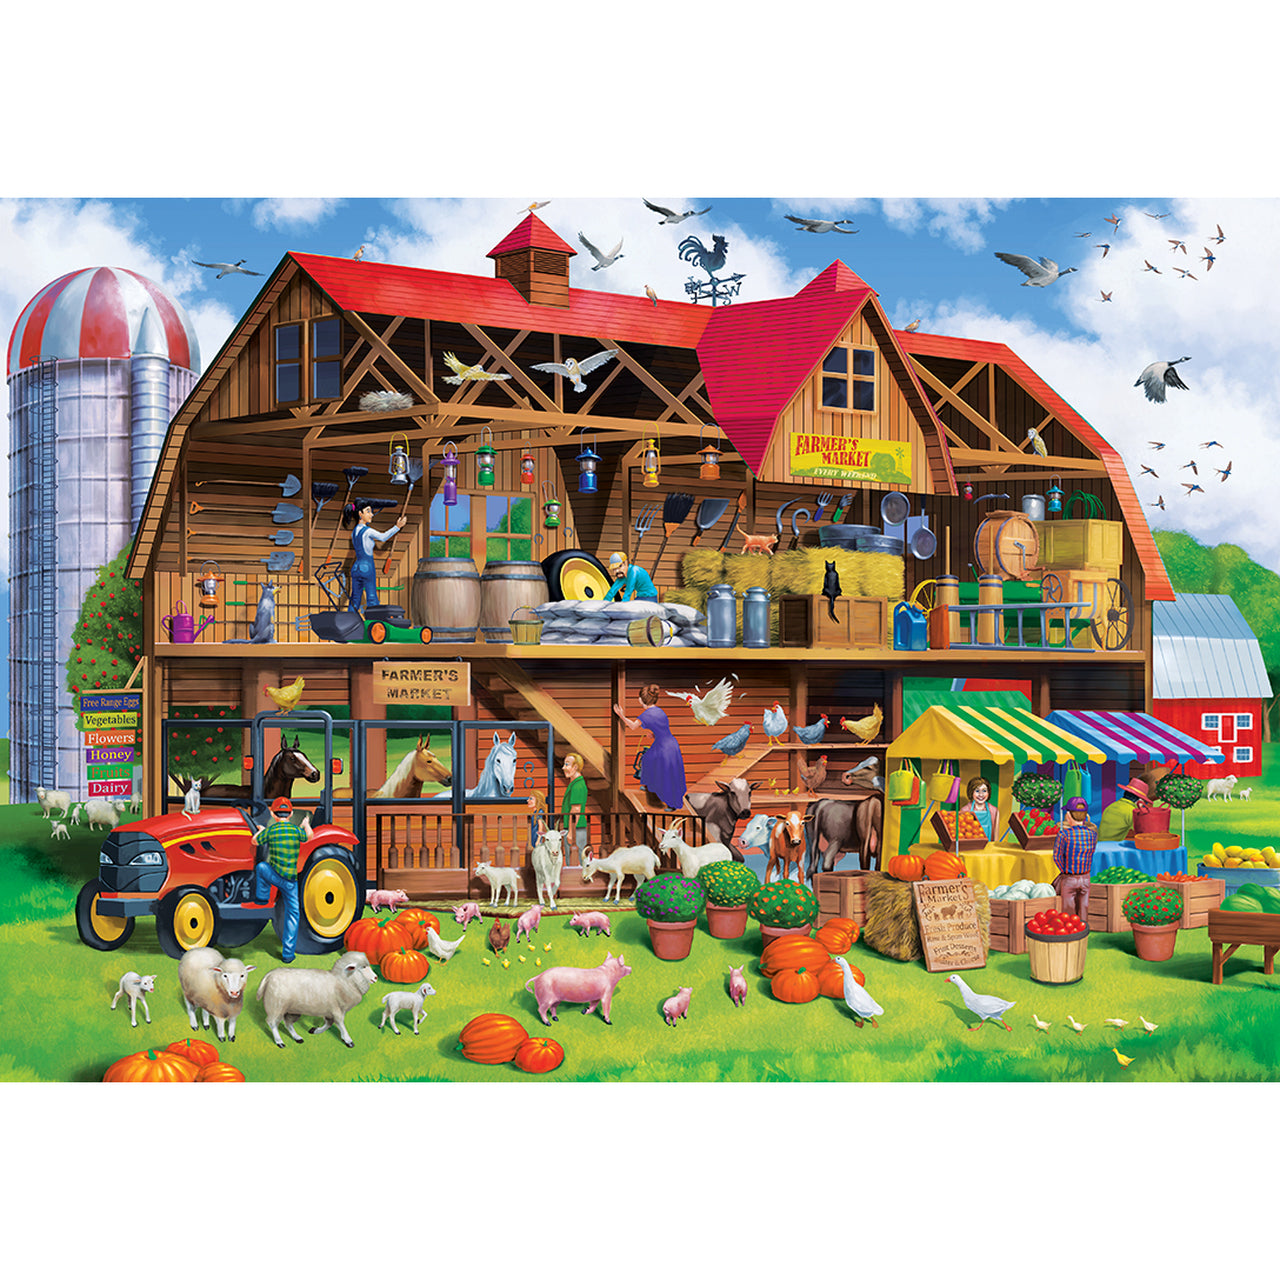 Cut-Aways Family Barn Large EZ Grip 1000 Piece Jigsaw Puzzle by Masterpieces